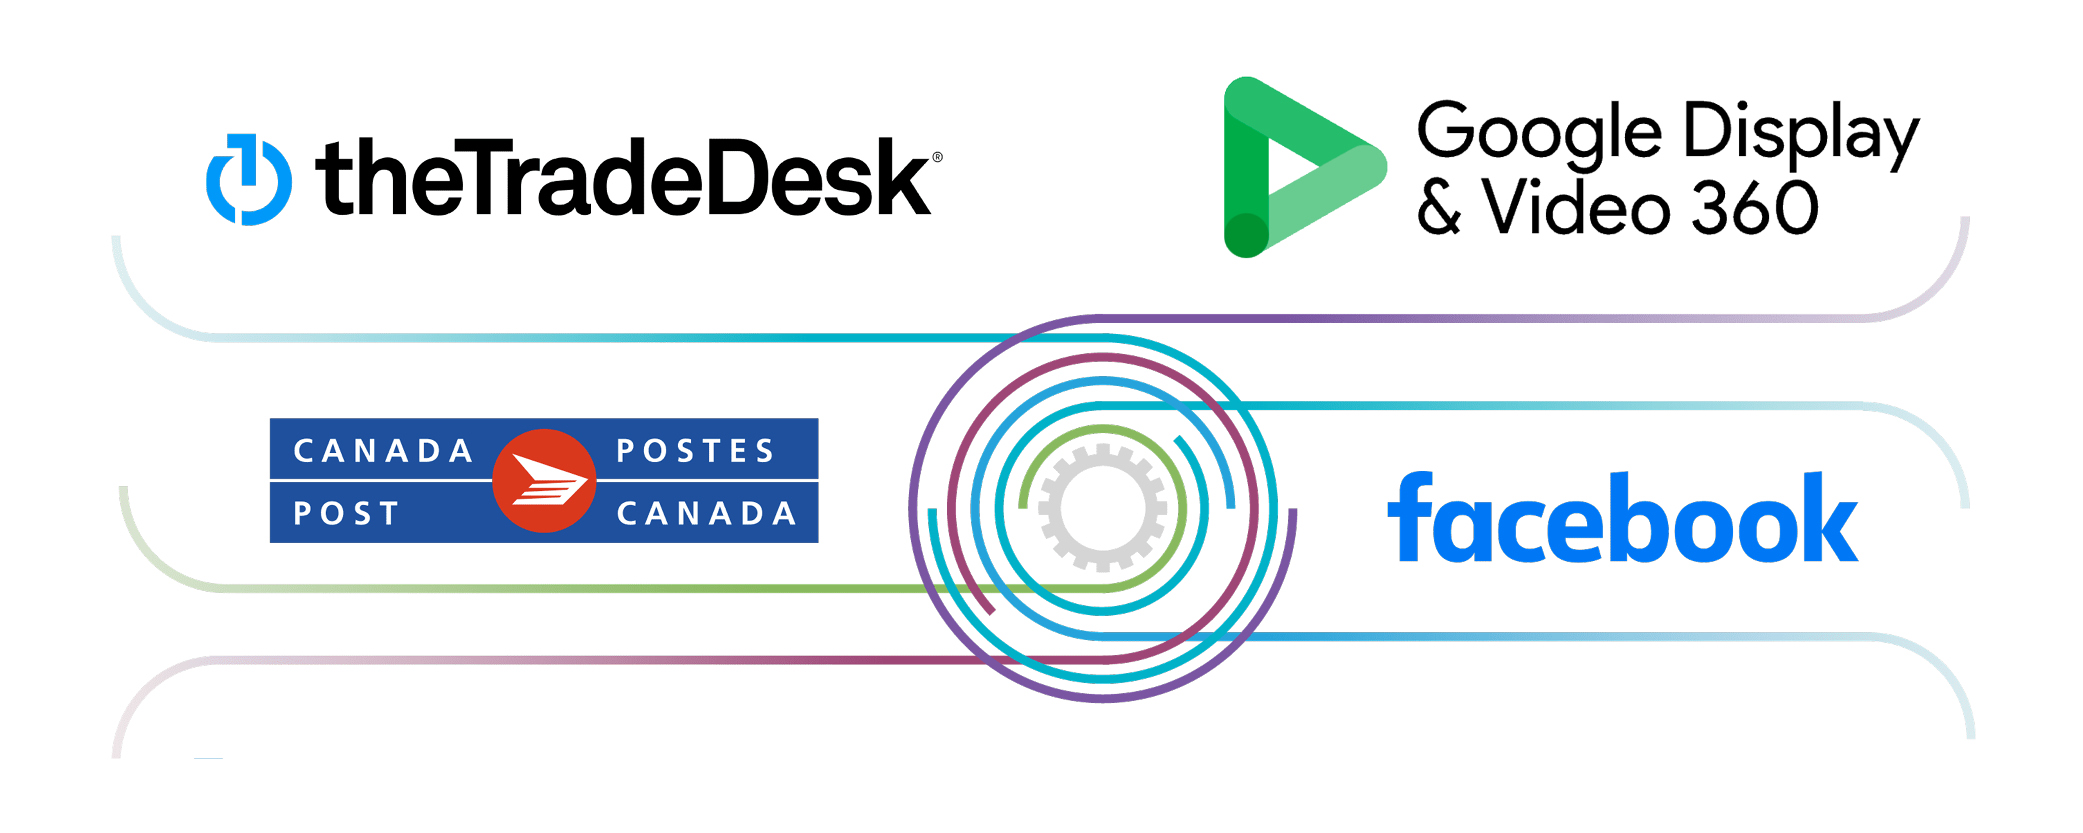 Media platforms that can receive audiences from the intelligentVIEW audience insights platform. The media listed here includes the trade desk, Google DV 360, Canada Post Smartmail, and Facebook.